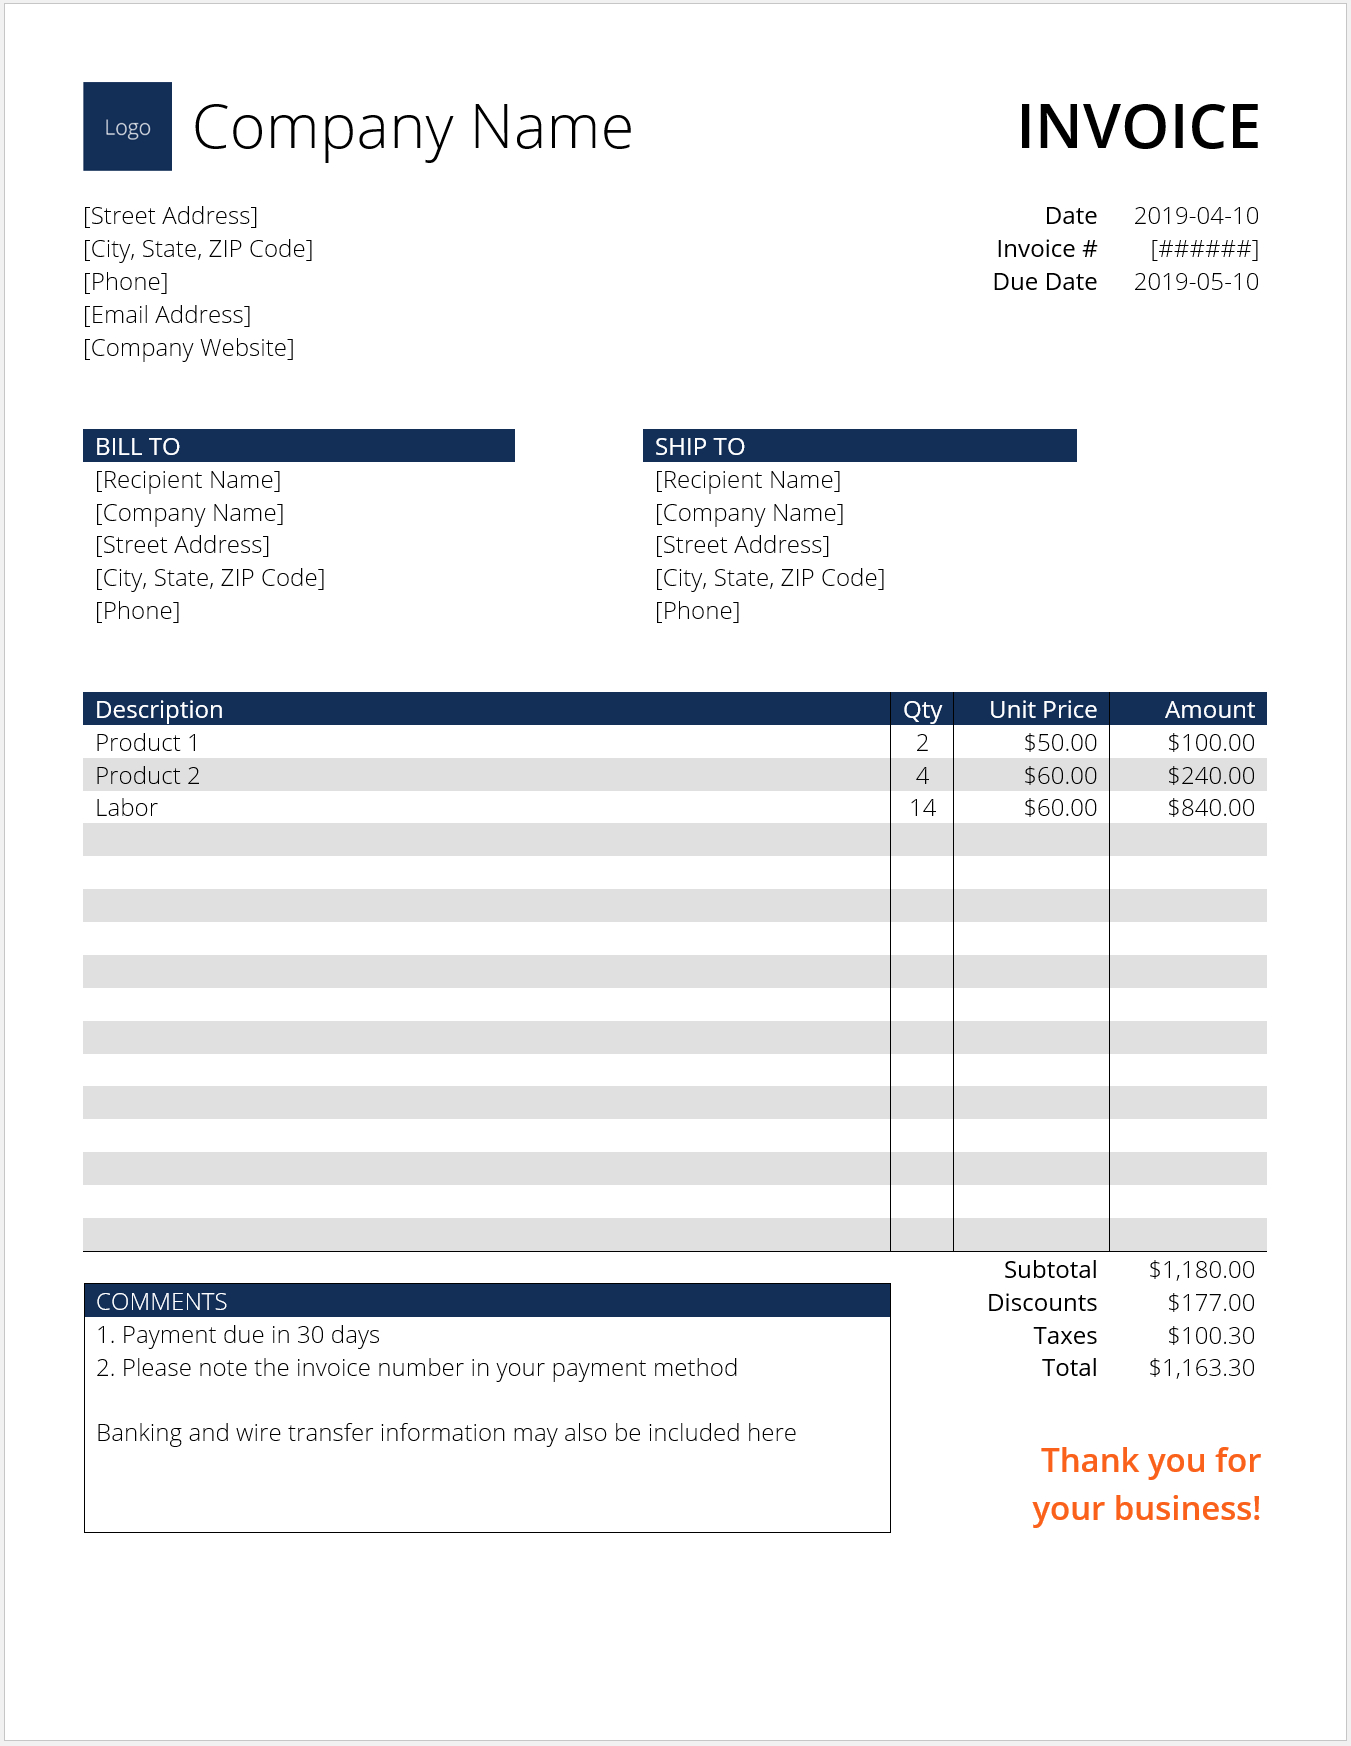 Invoice Template (Word) – Download Free Template At Cfi Throughout Interest Invoice Template